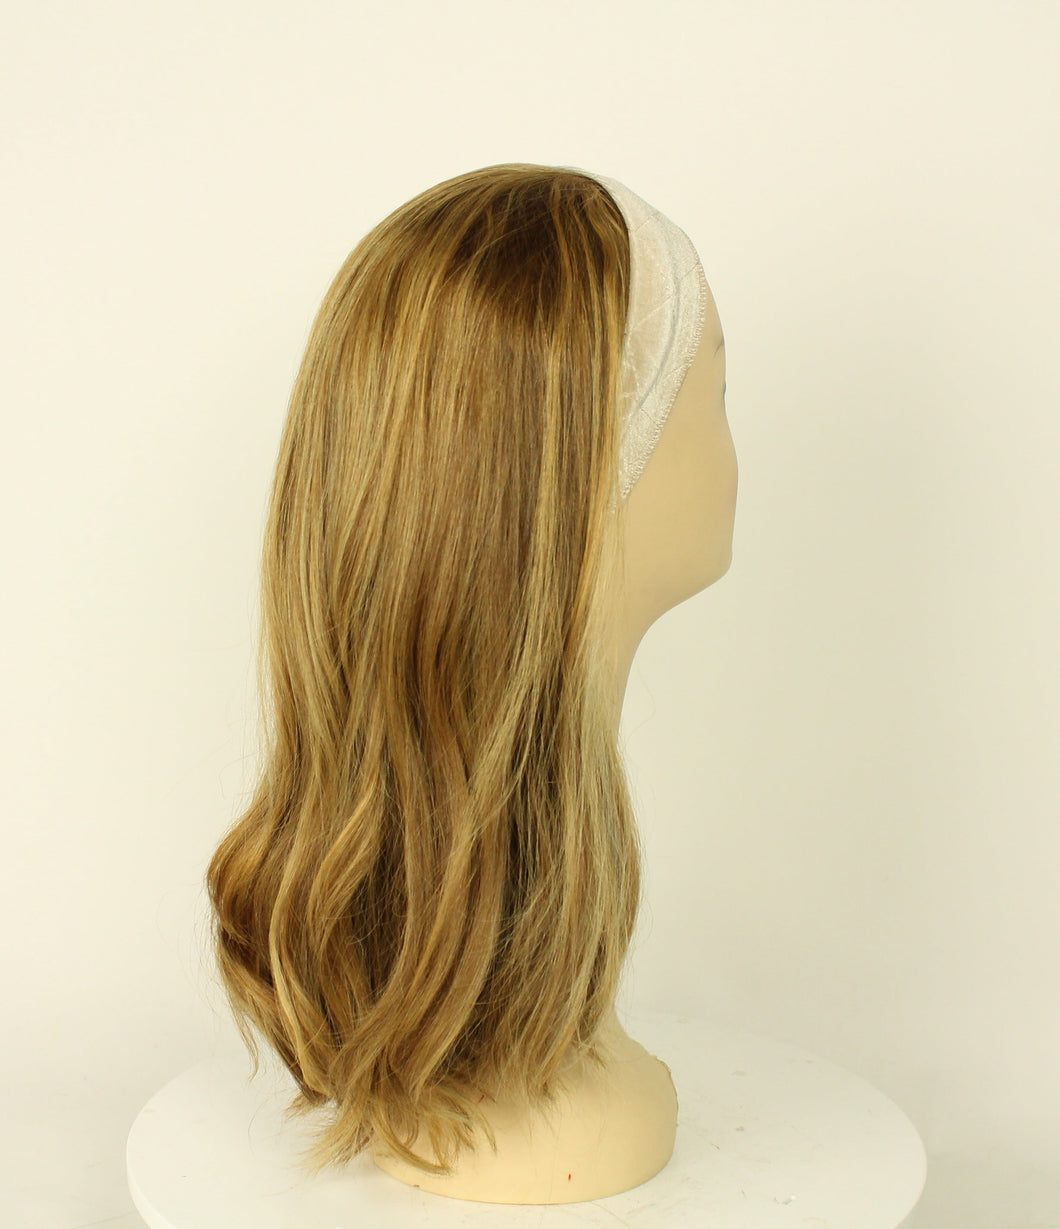 AVALON FALL LIGHT BLONDE WITH ASHY HIGHLIGHTS SIZE S